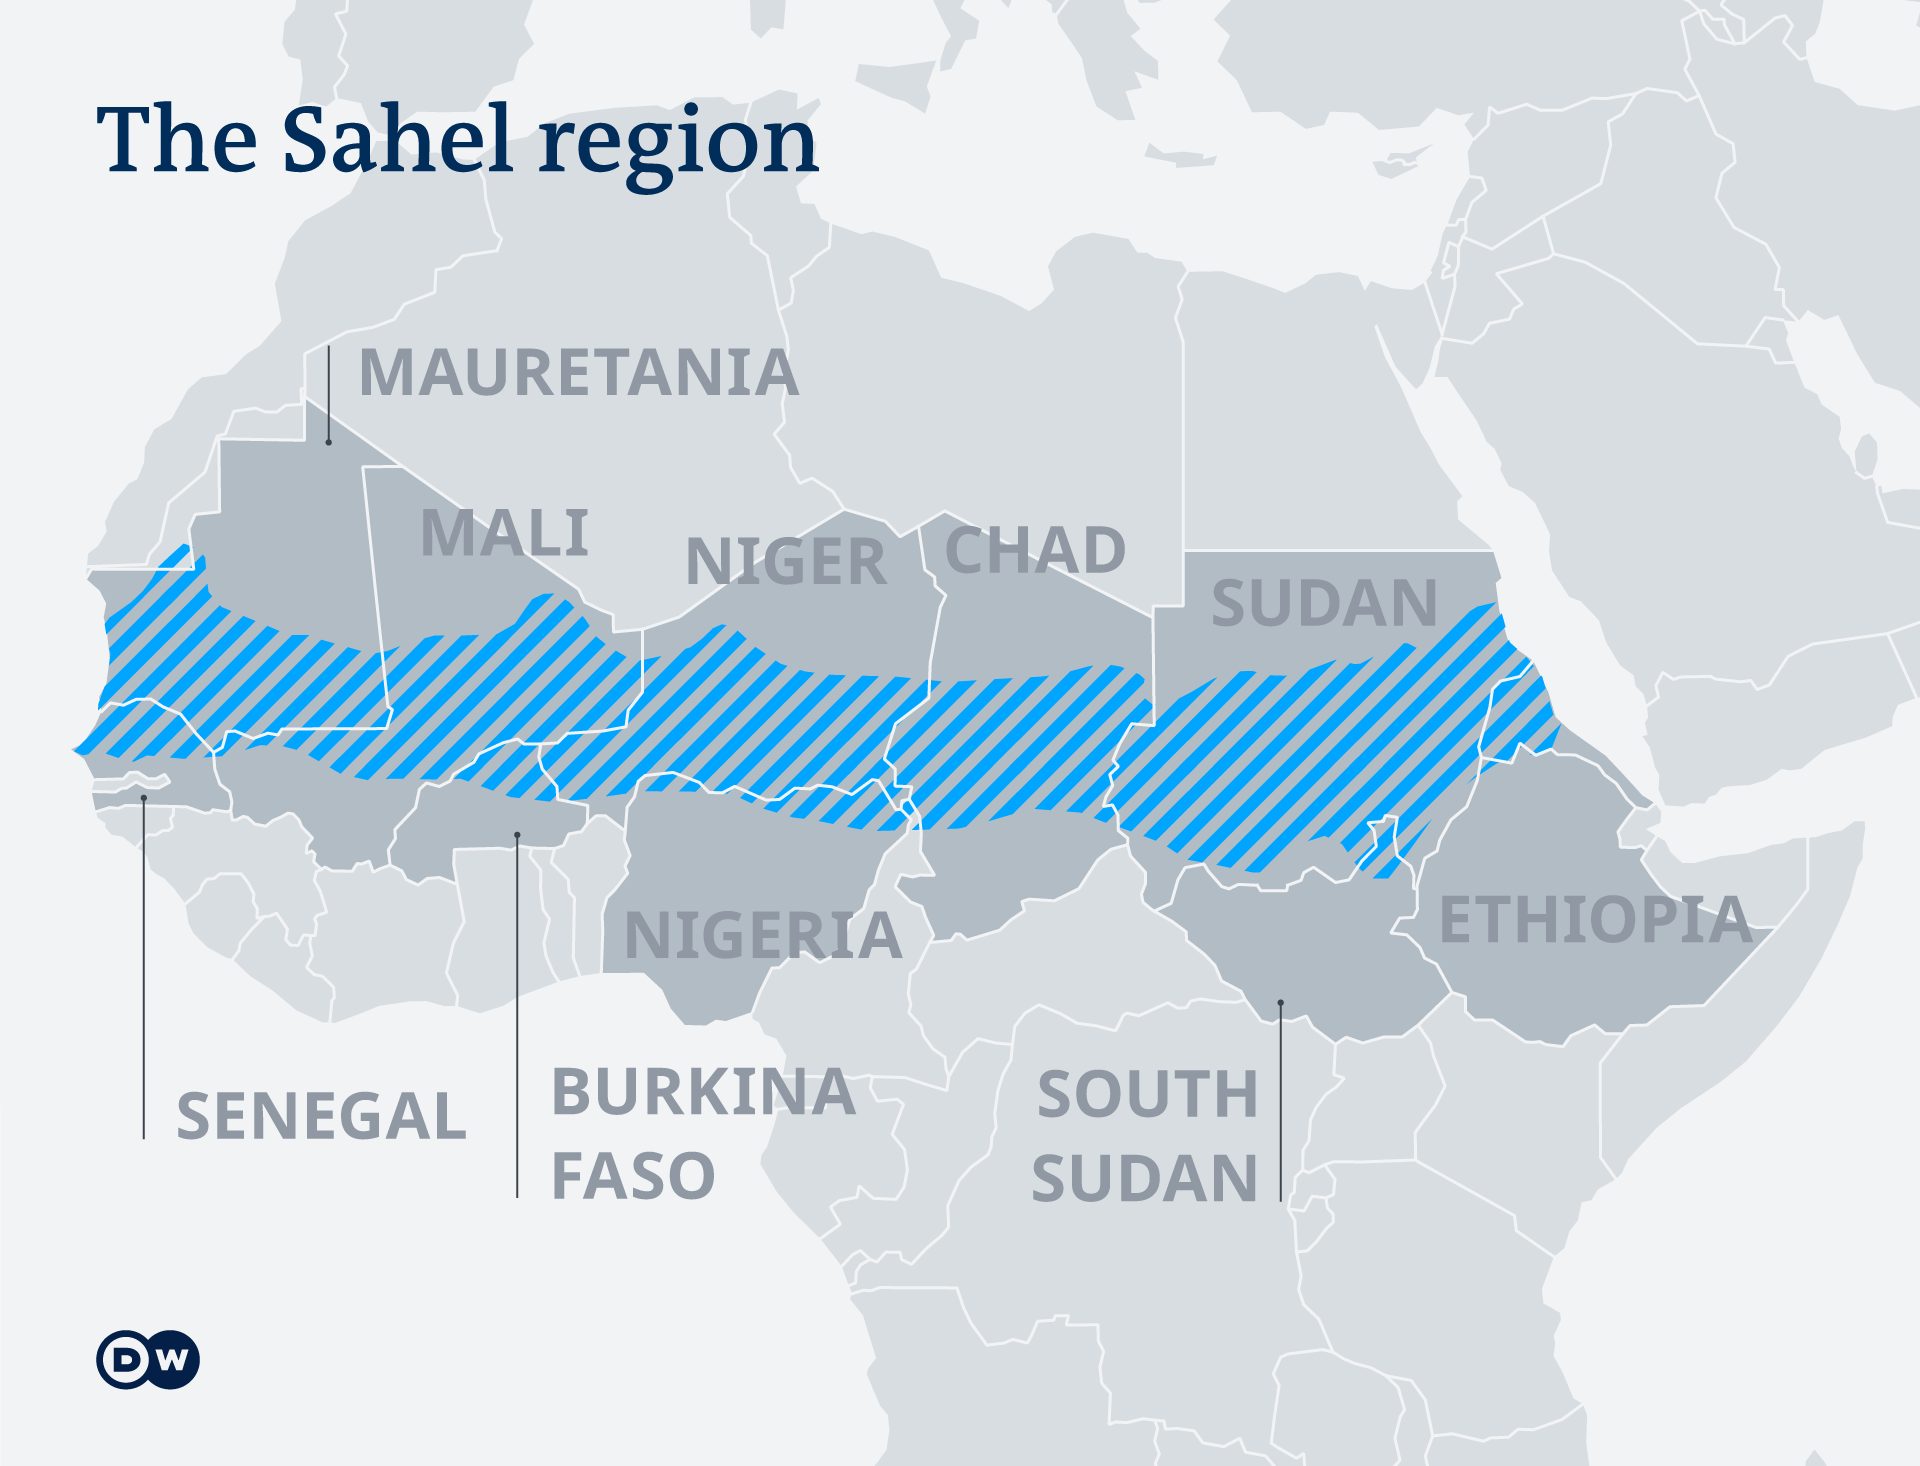 A map showing the countries within the Sahel region